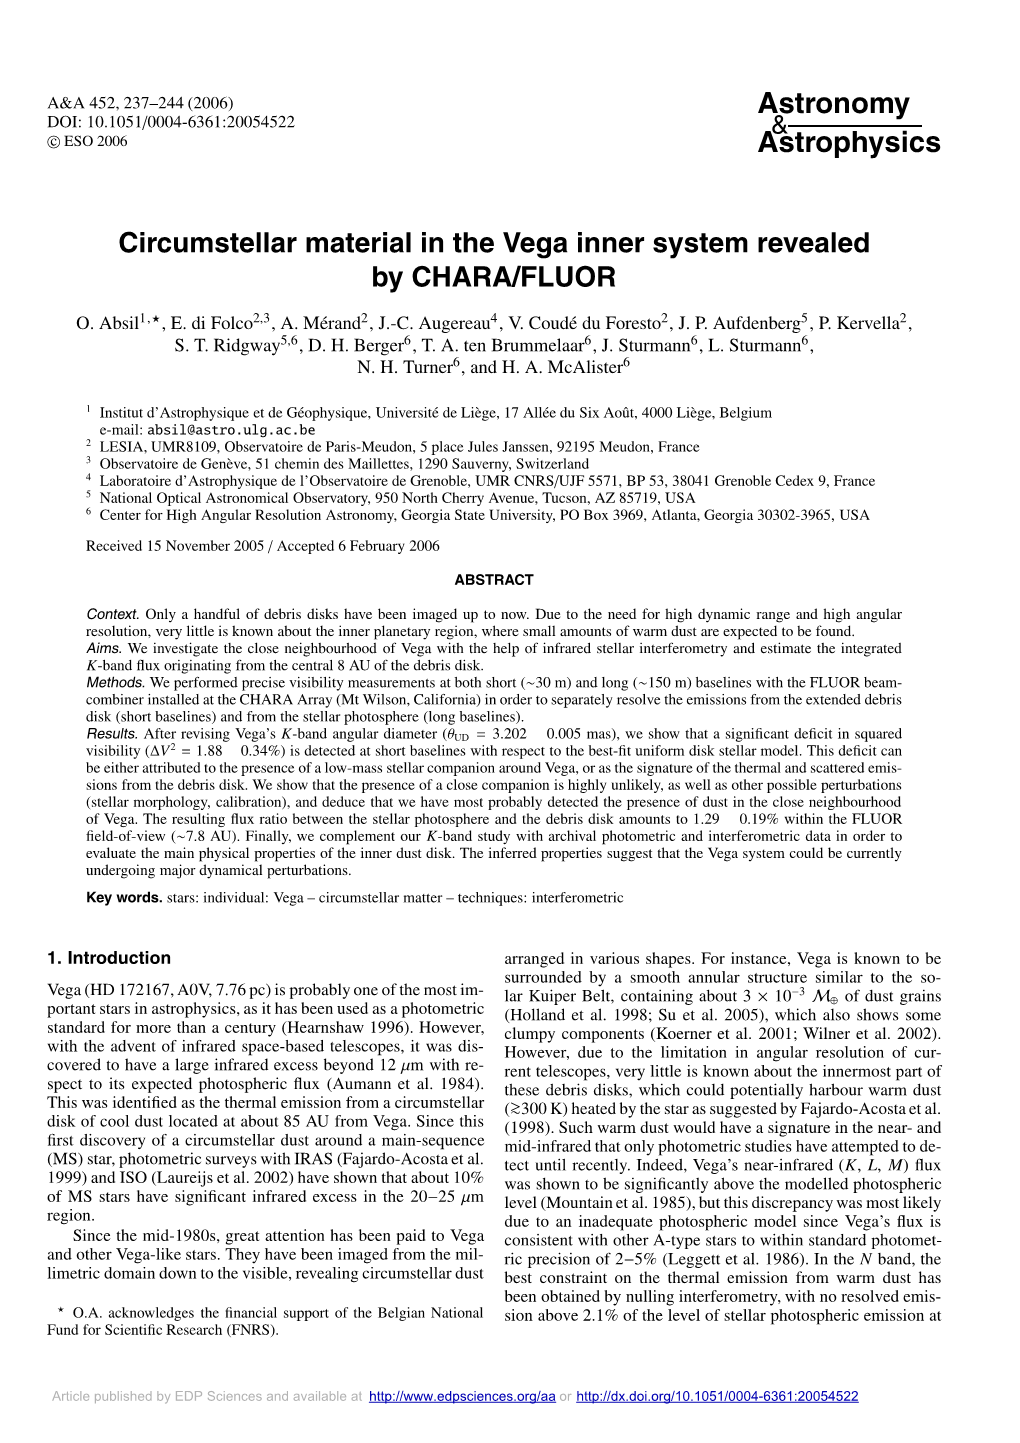 Circumstellar Material in the Vega Inner System Revealed by CHARA/FLUOR